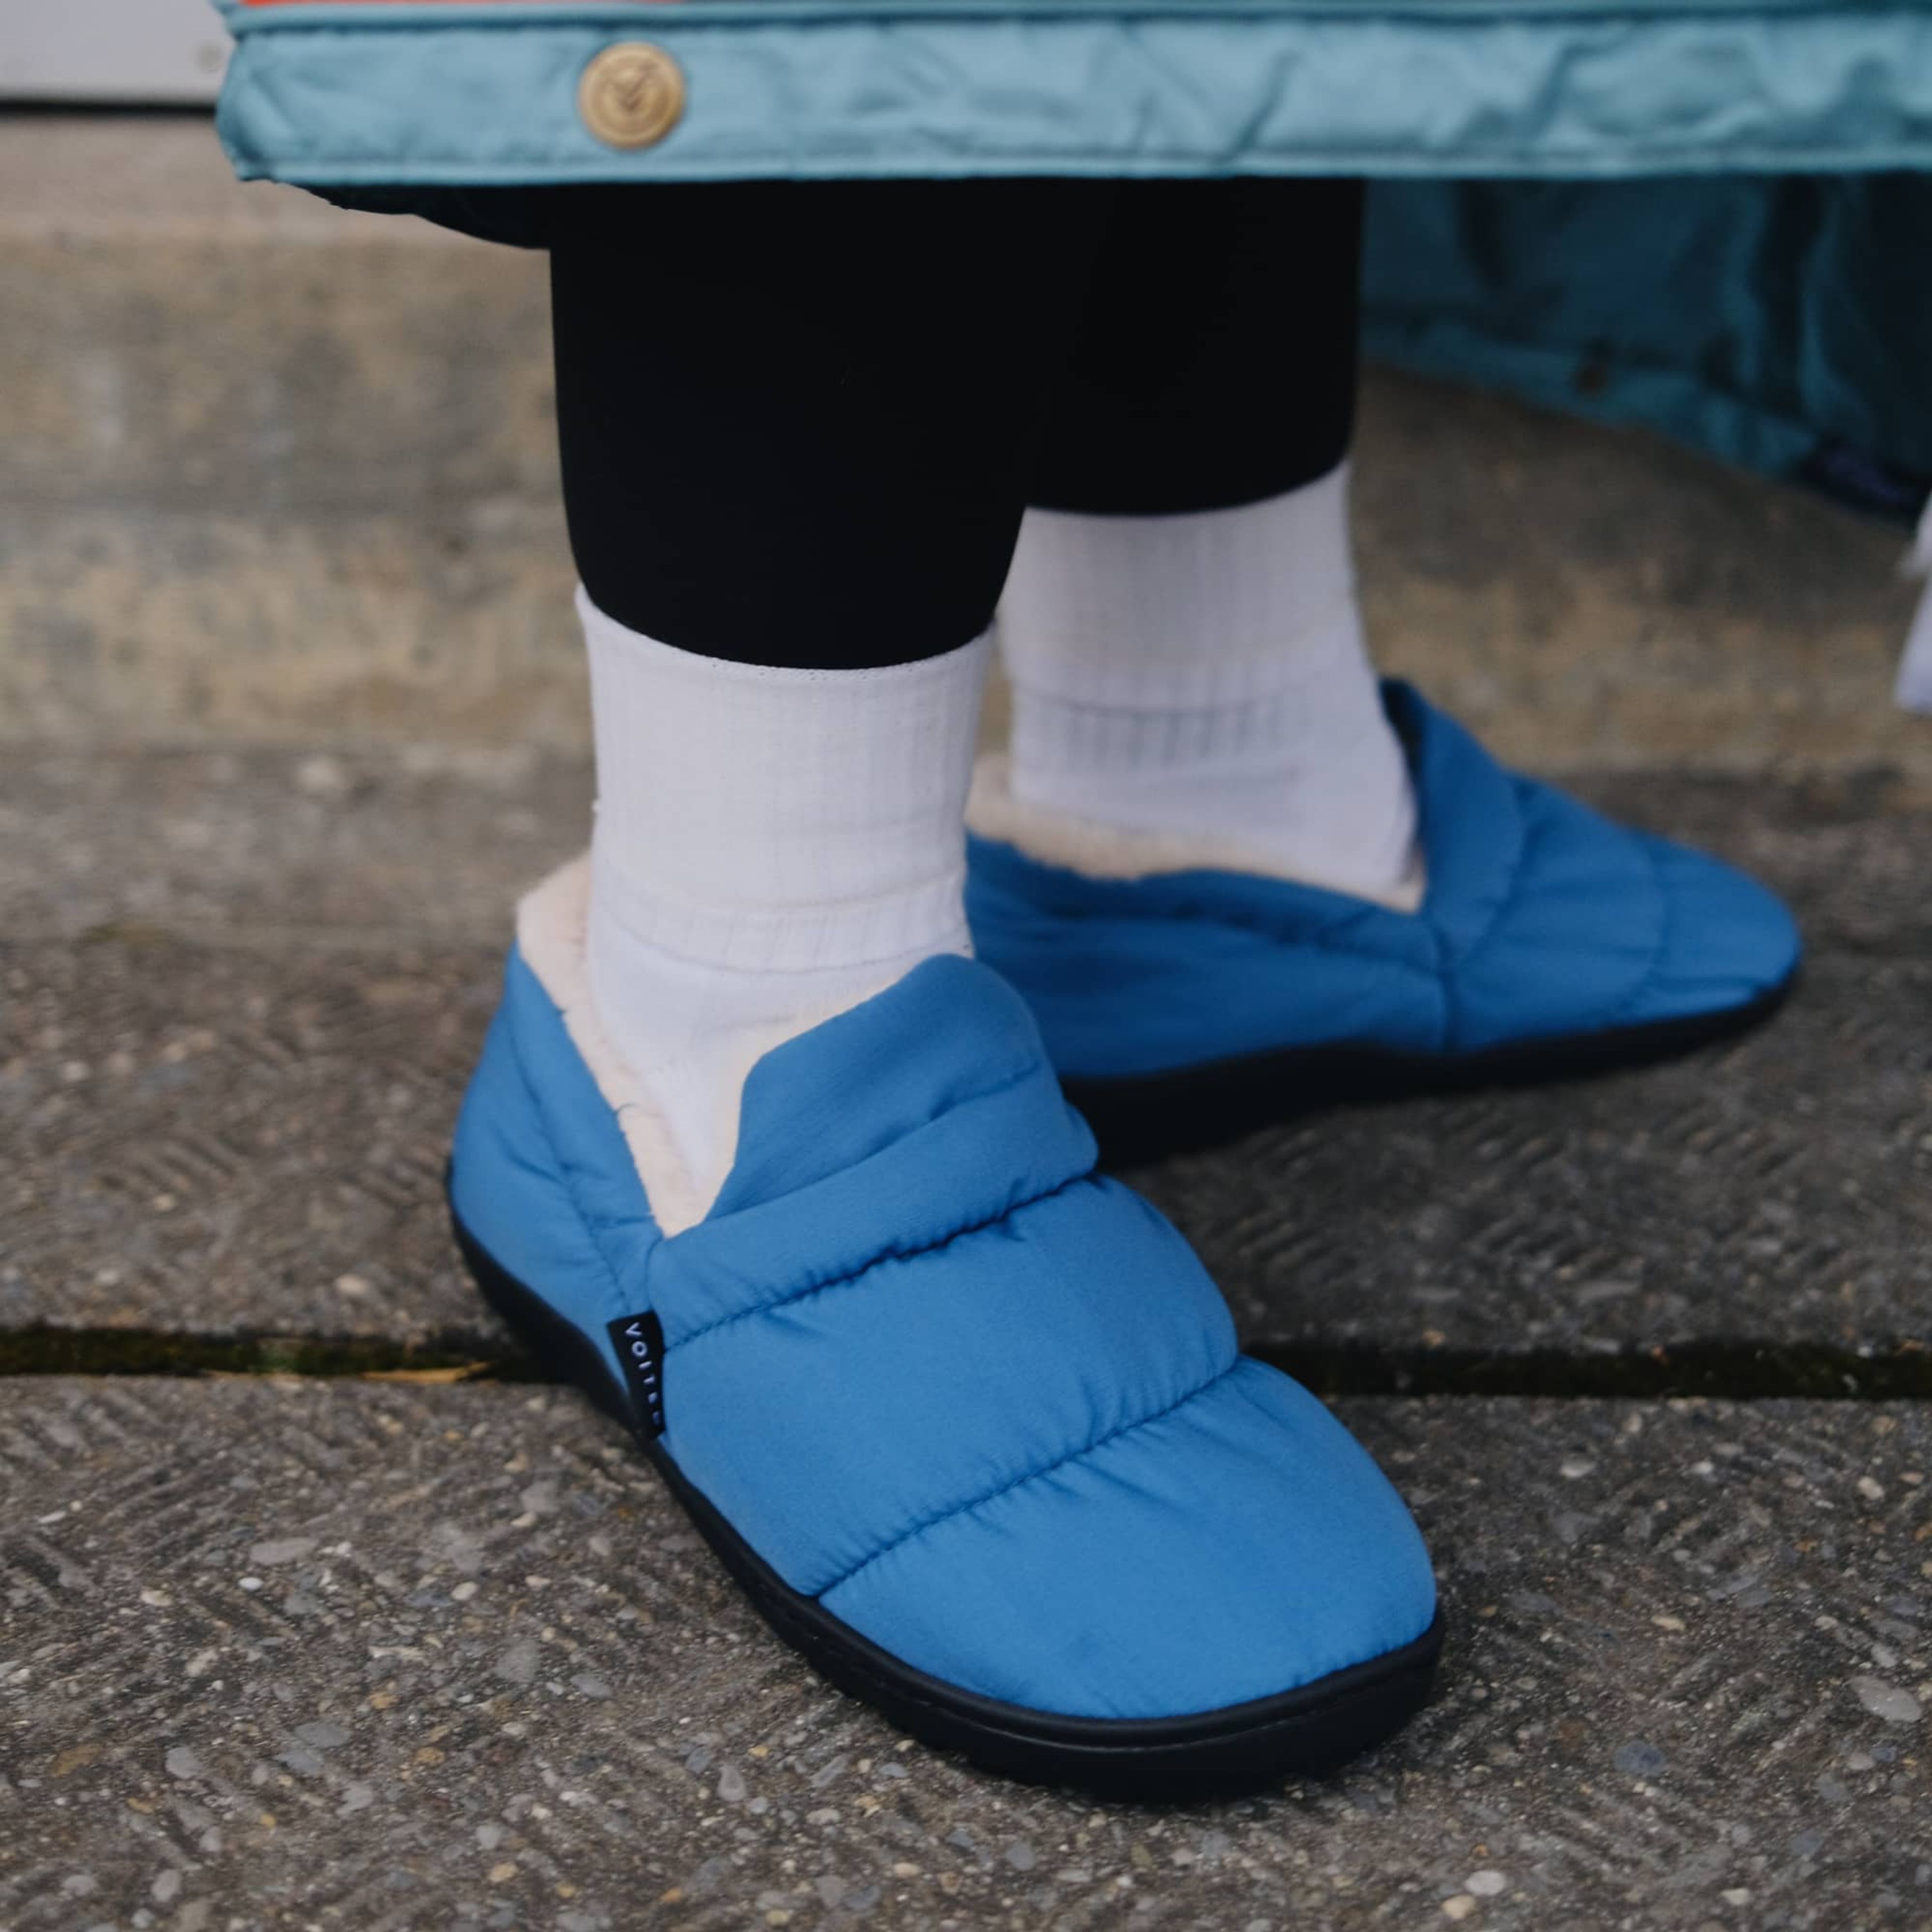 VOITED CloudTouch Slippers - Lightweight, Indoor/Outdoor Fleece-Lined Camping Slippers - Arctic Blue